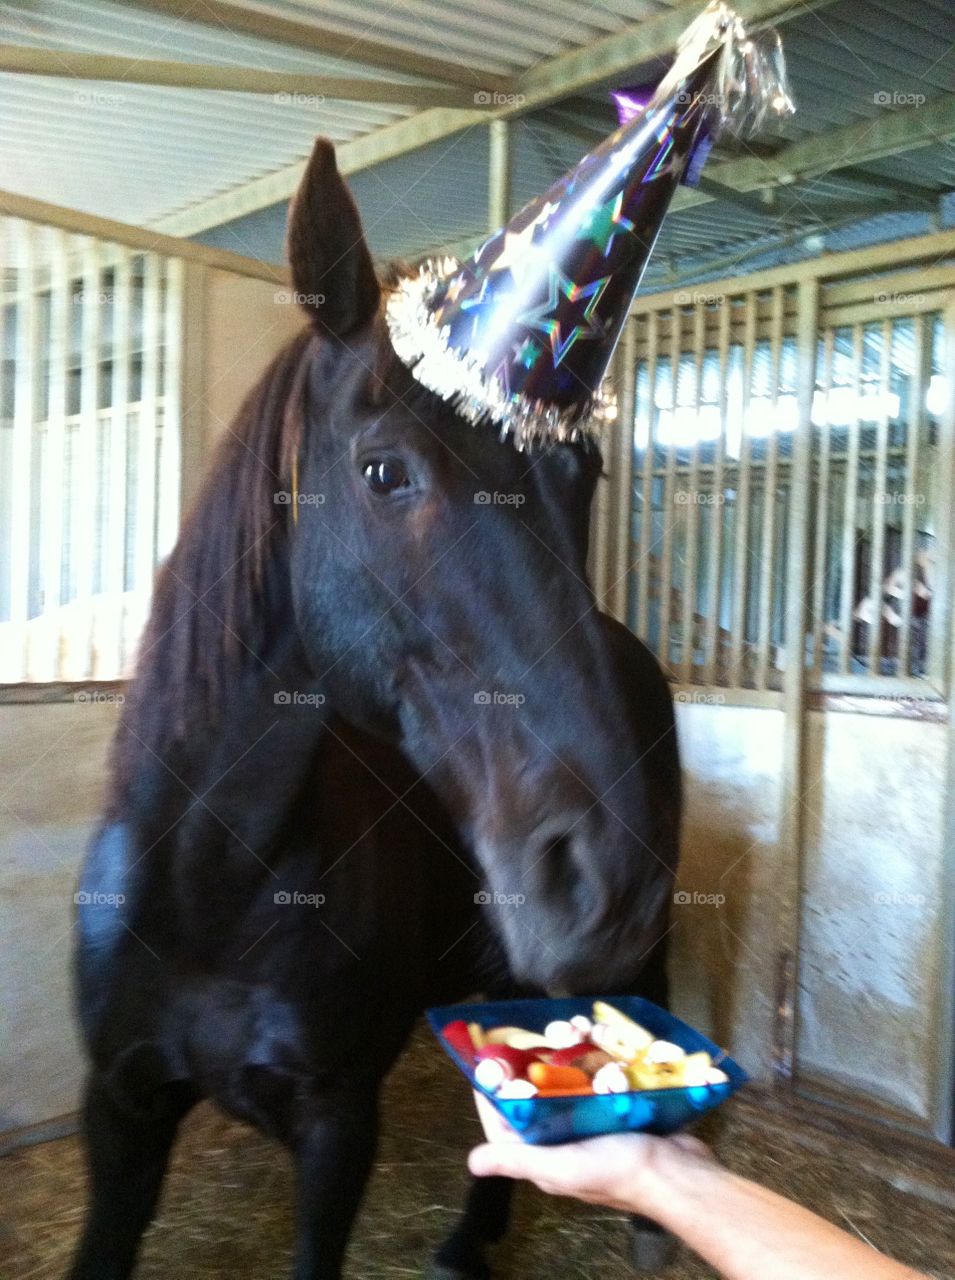 Romeo the horse is ready for his birthday tray full of goodies.